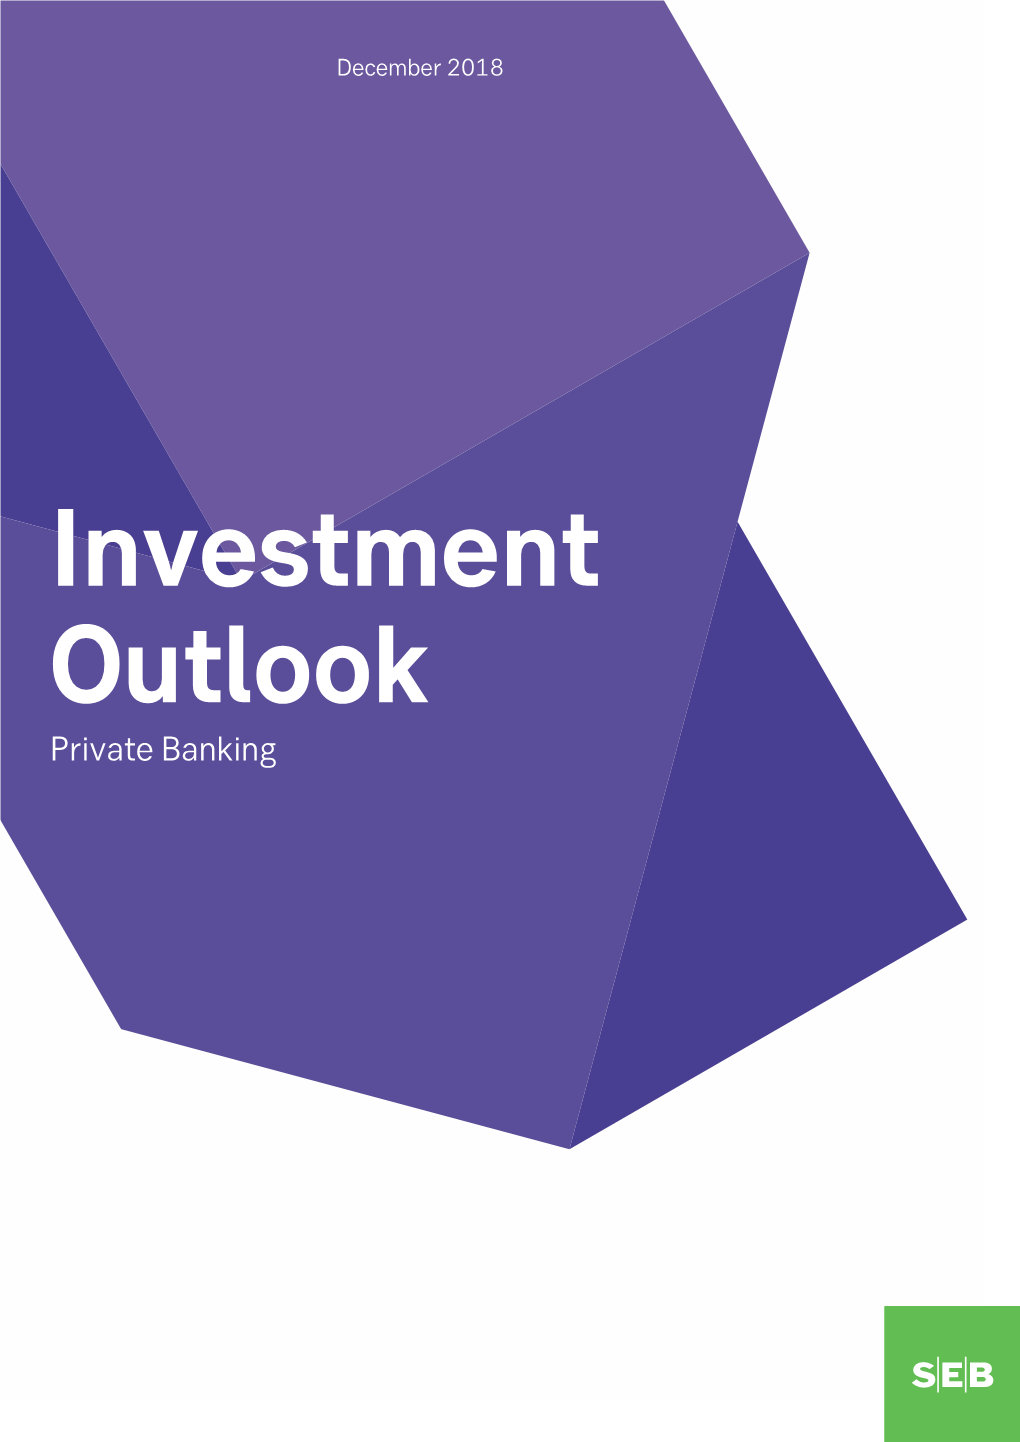 Investment Outlook Private Banking Contents